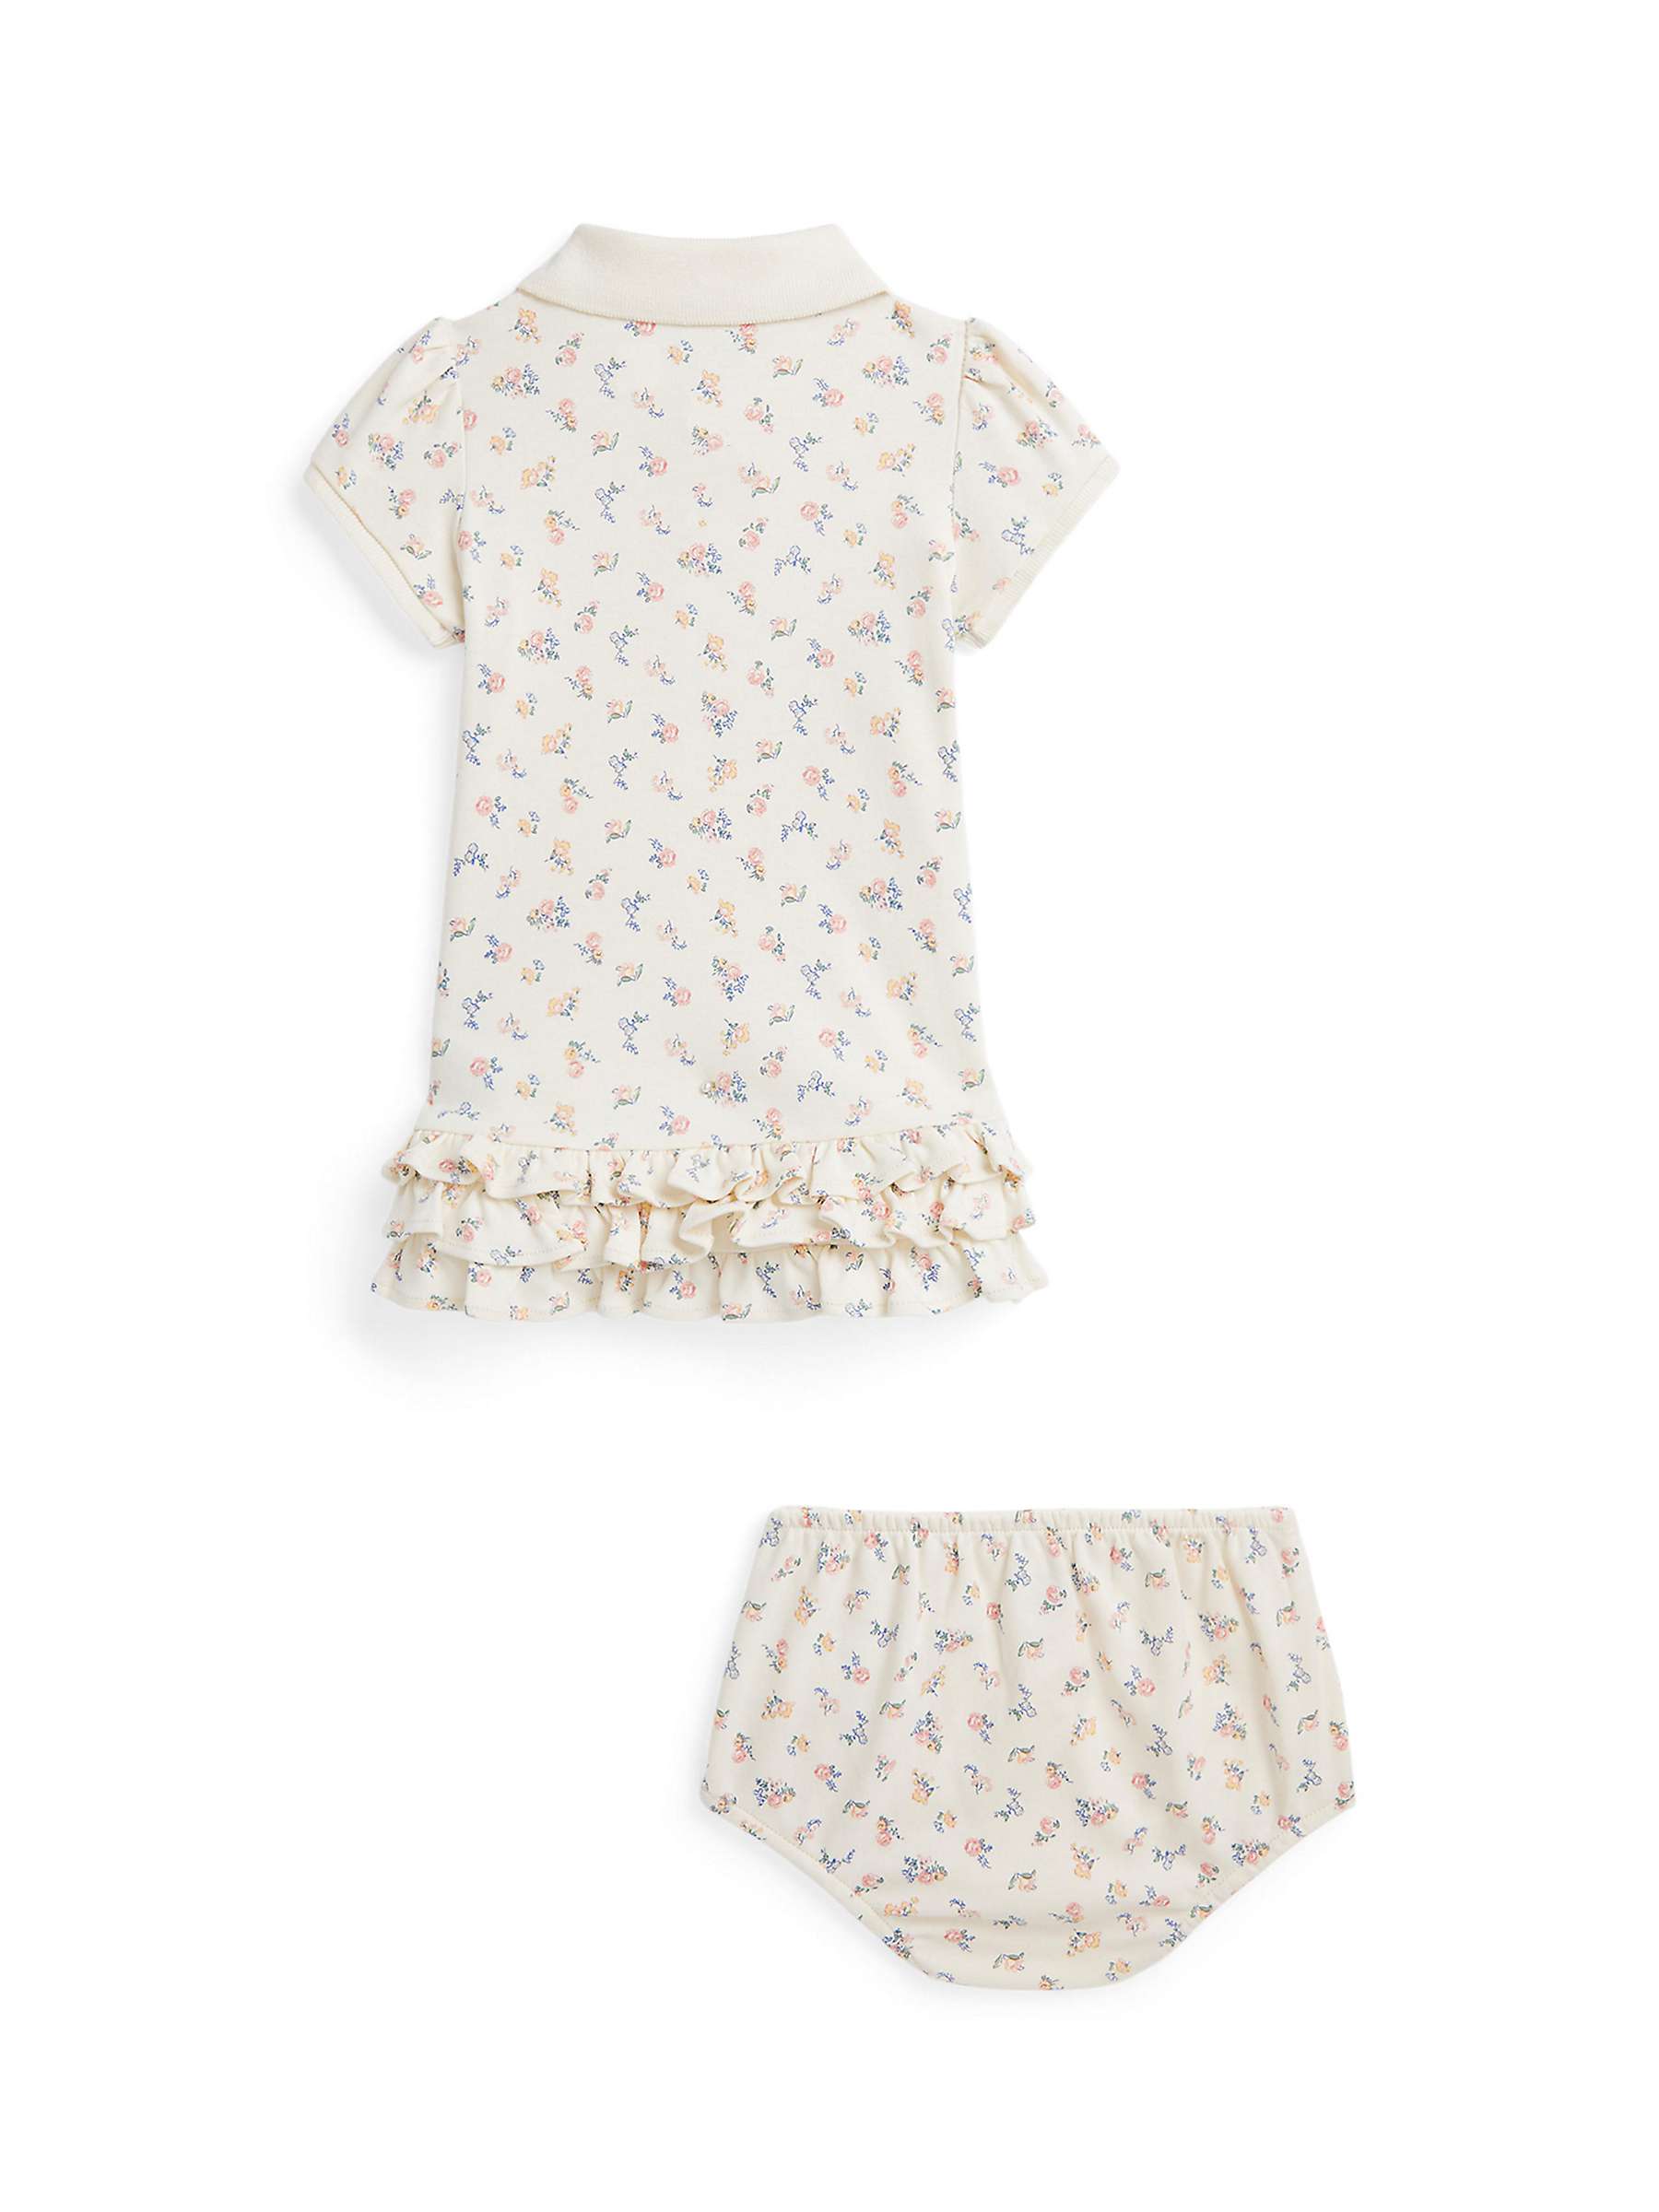 Buy Ralph Lauren Baby Cupcake Print Outfit, White Online at johnlewis.com